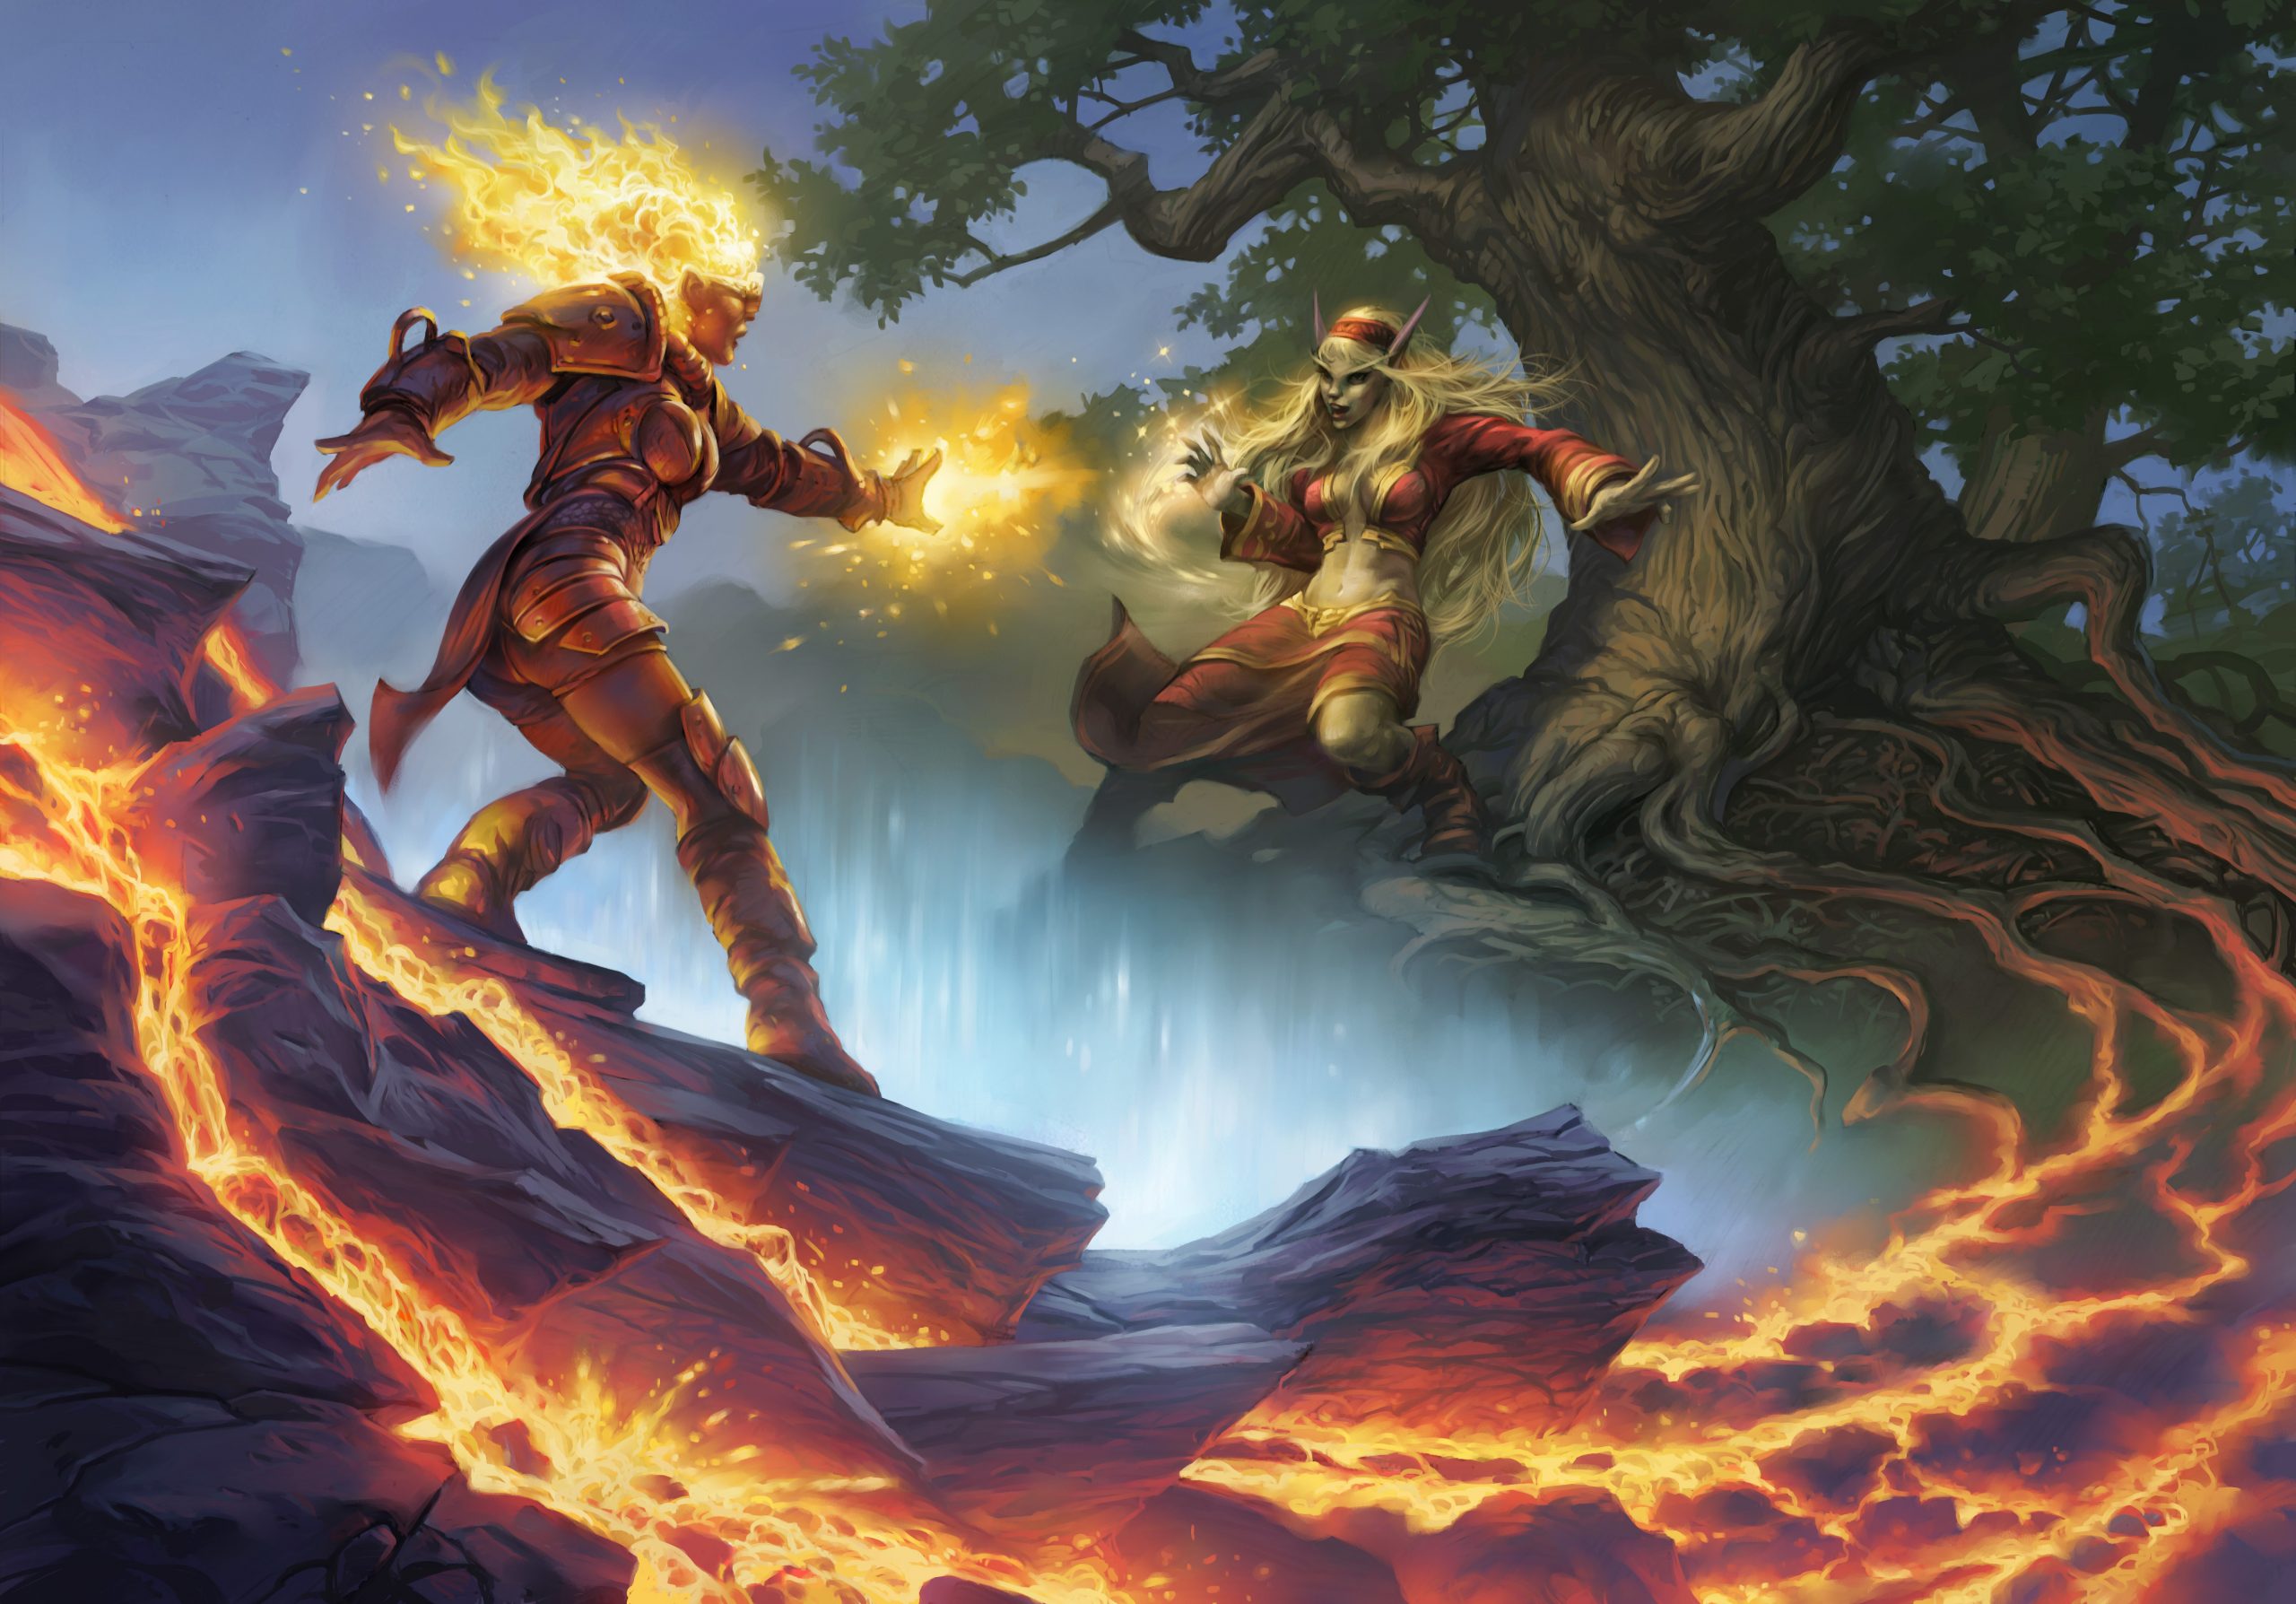 Spatial Merging - Magic:the Gathering Illustration - © Wizards of the Coast